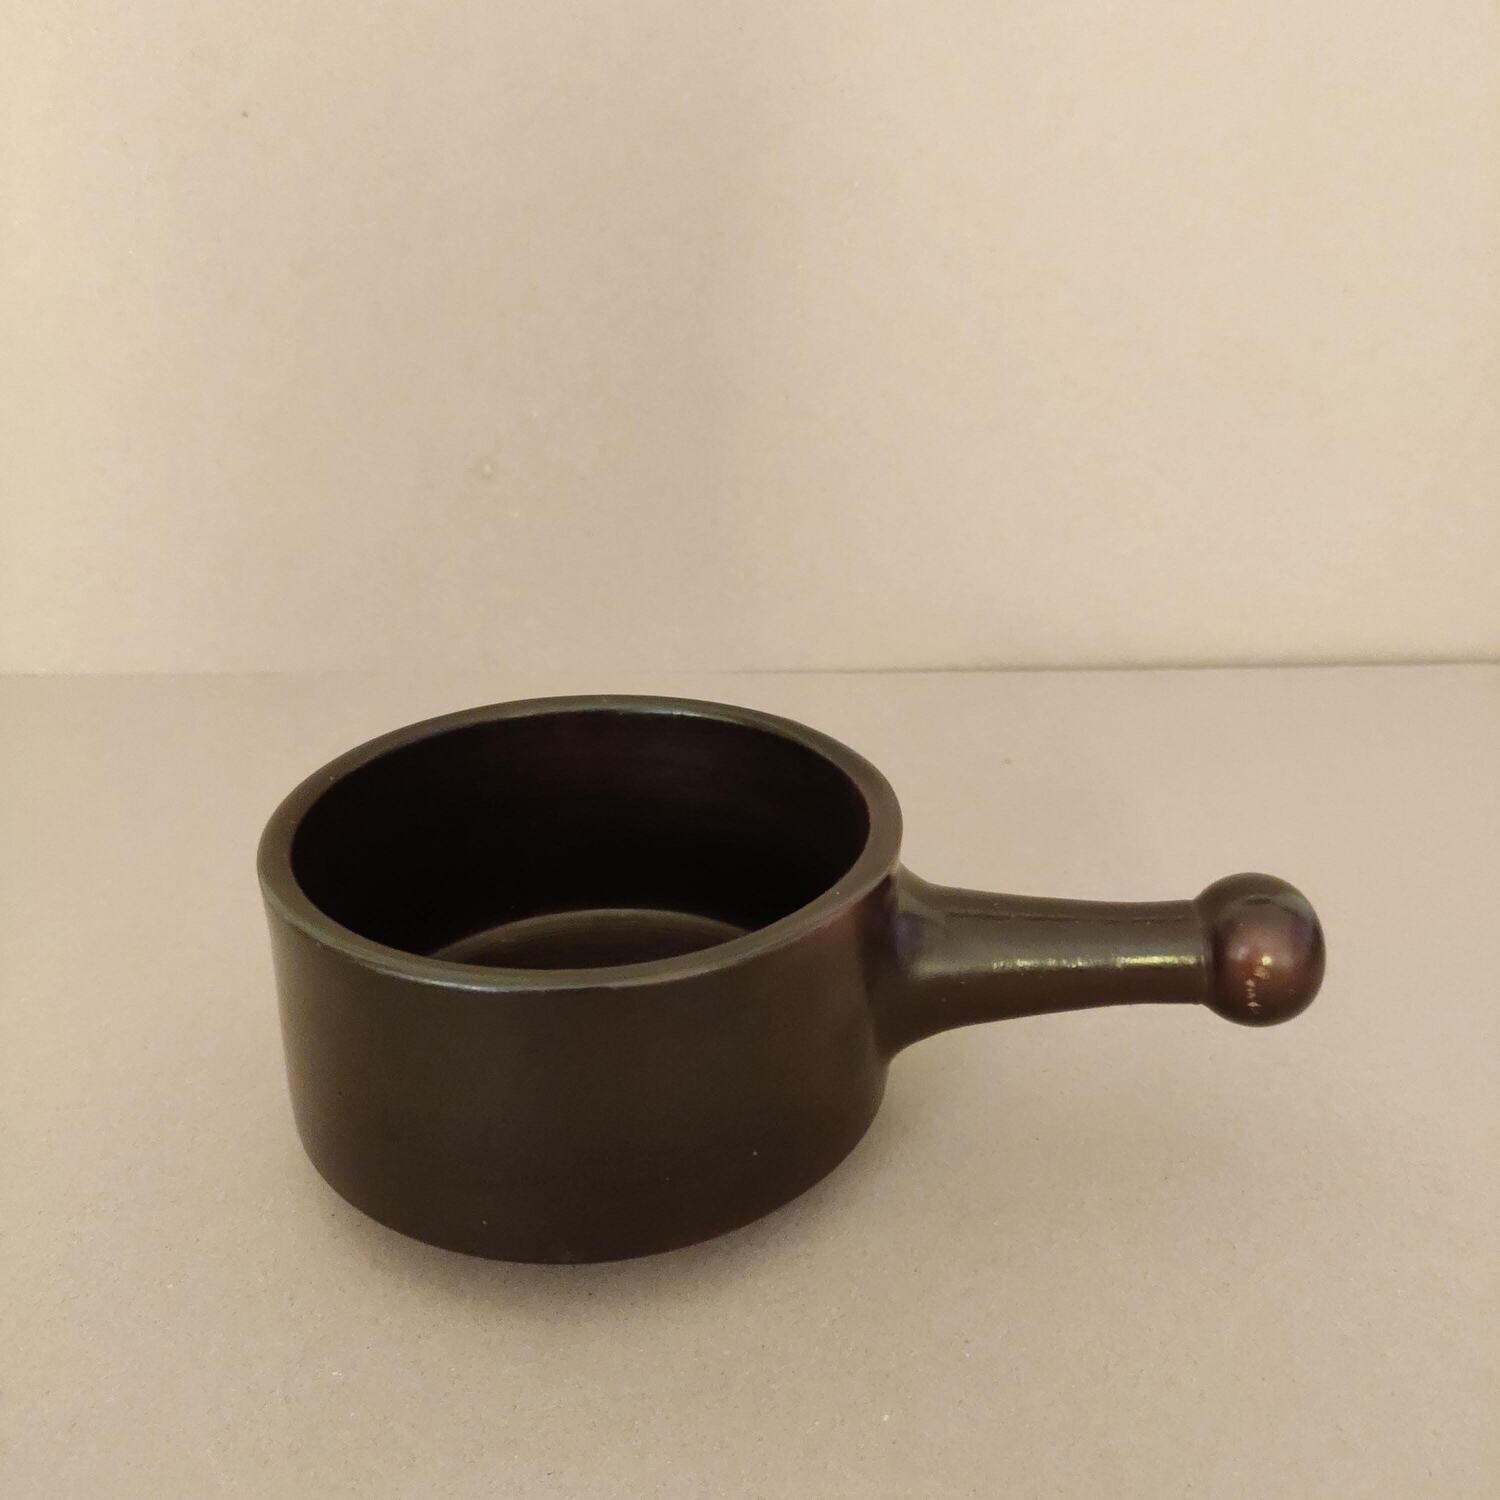 Terracotta Shaded Serving Bowl (400 ML) - 1 pc